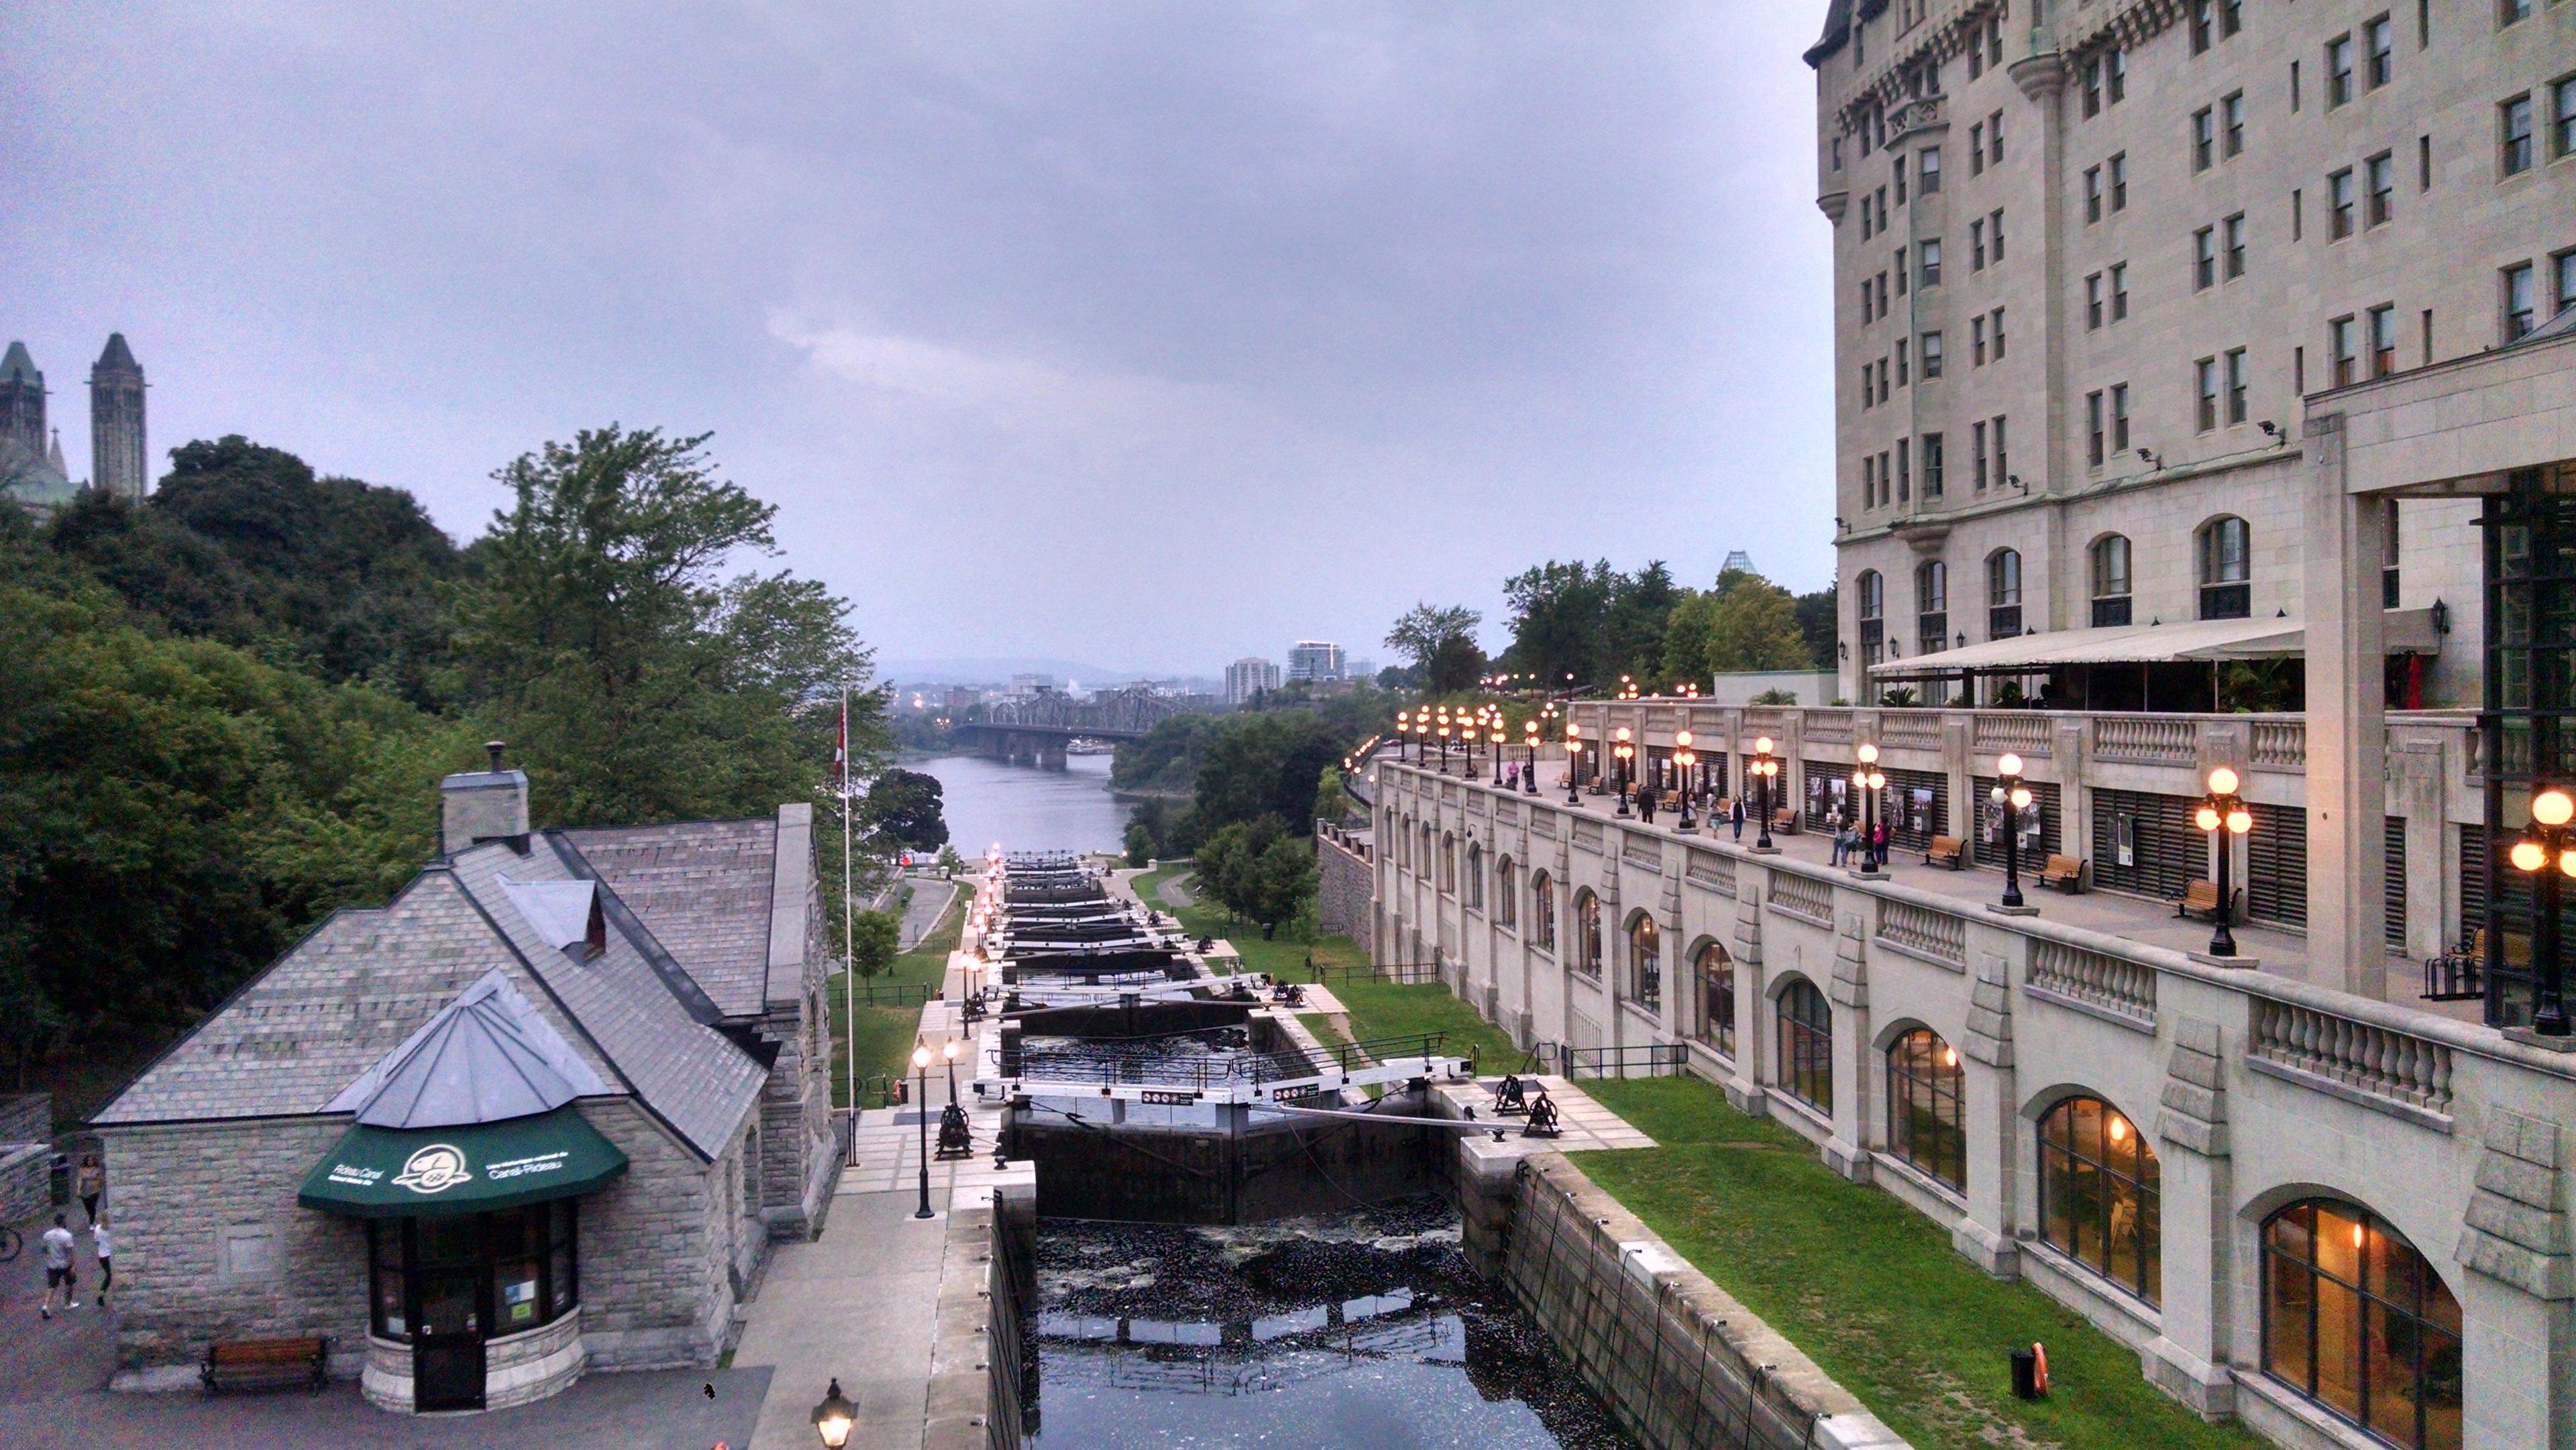 Cover image of this place Rideau canal